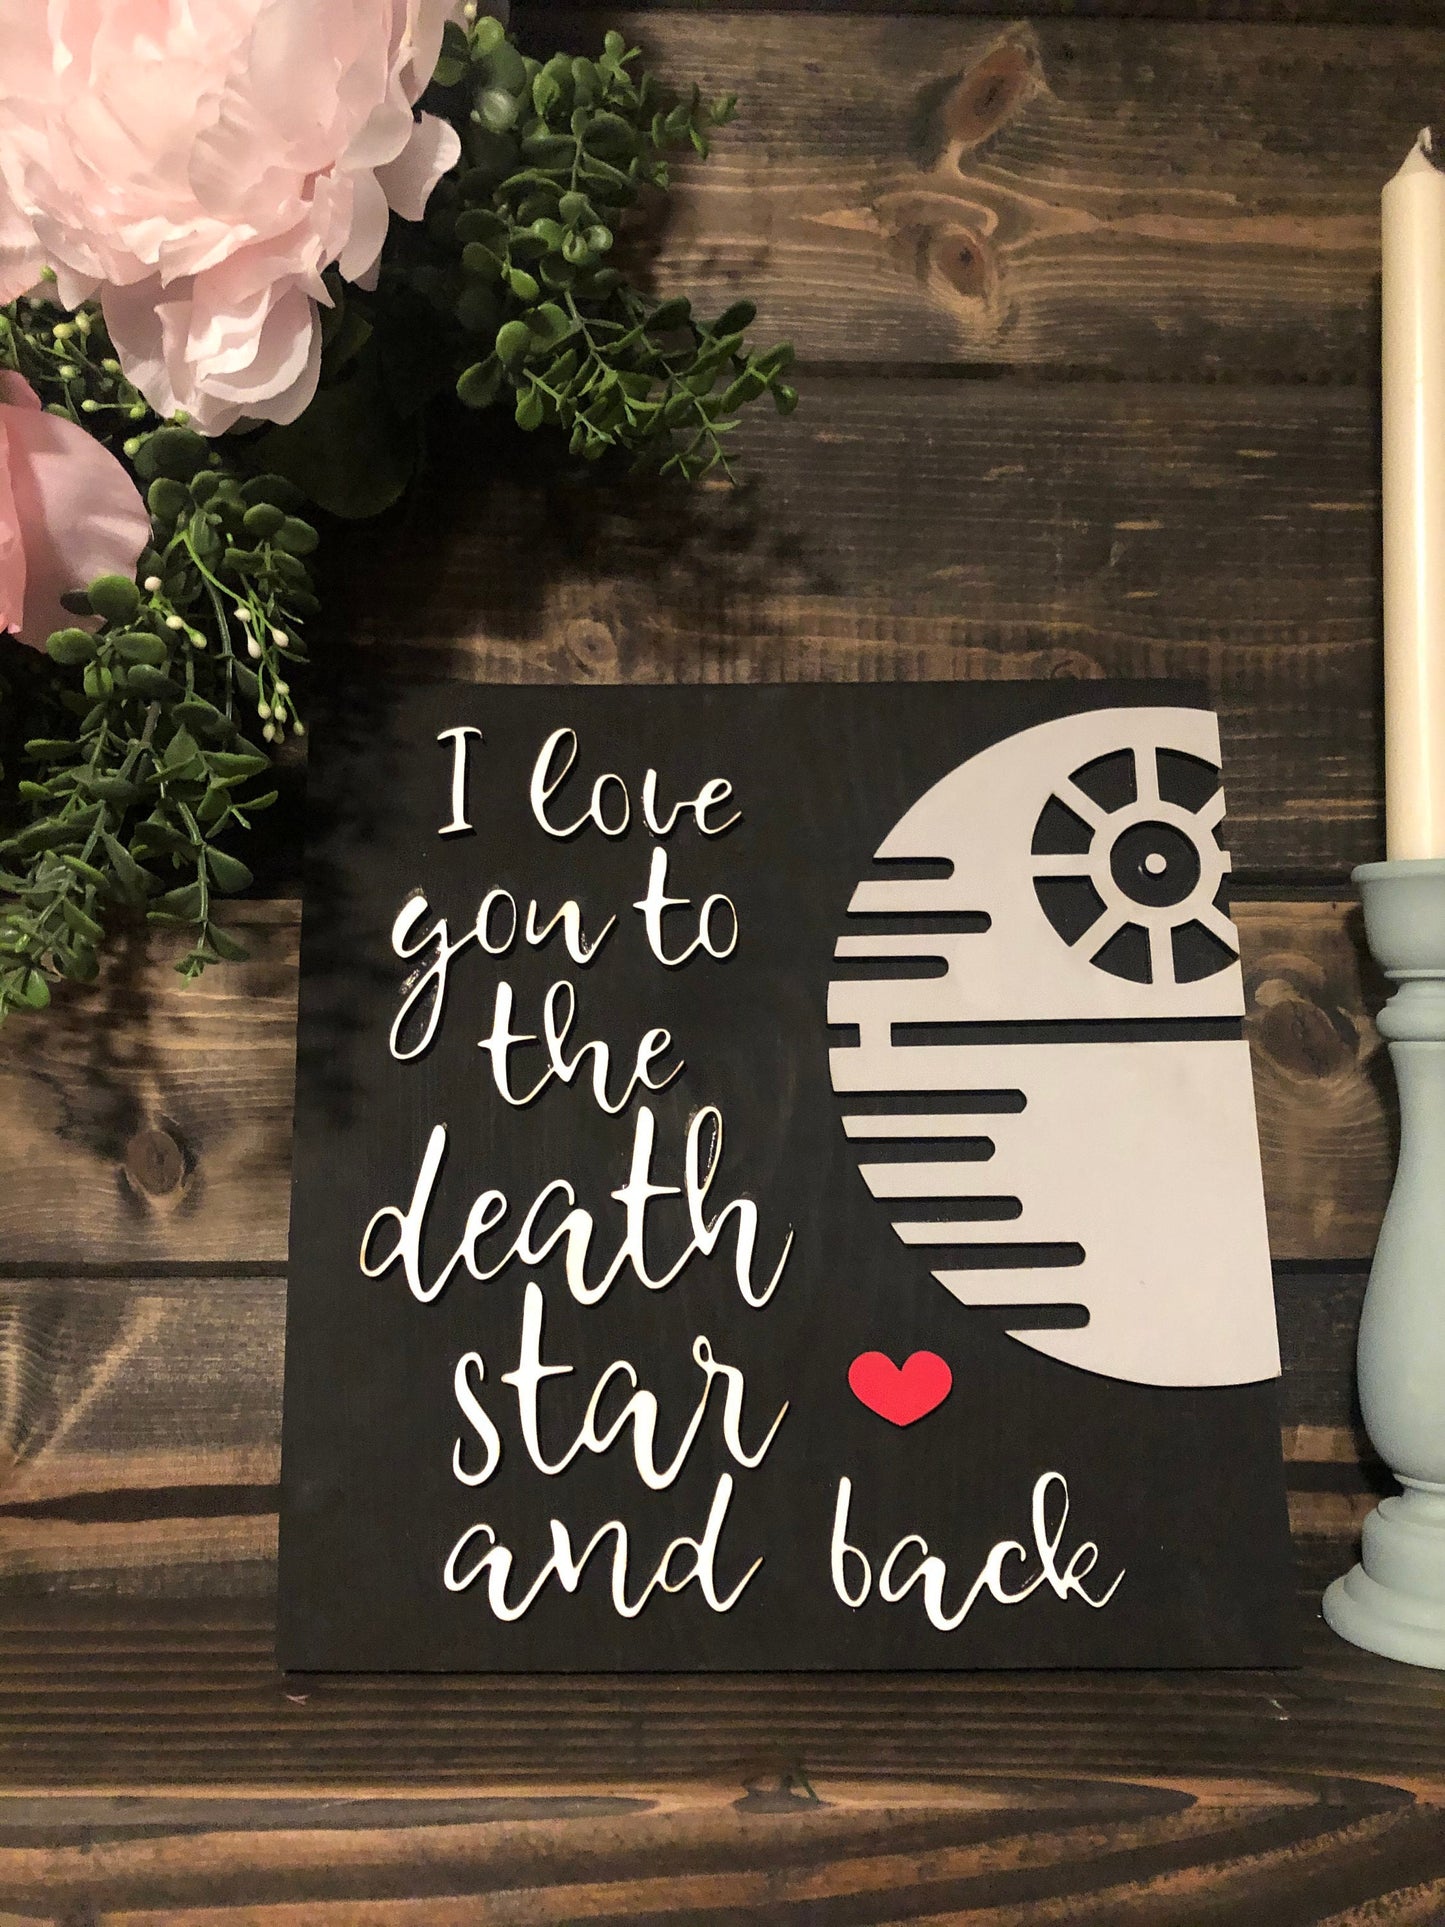 I love you to the Death Star and back, Death Star sign, Star Wars sign, Star Wars valentines sign, I love you sign, I love you, Death Star